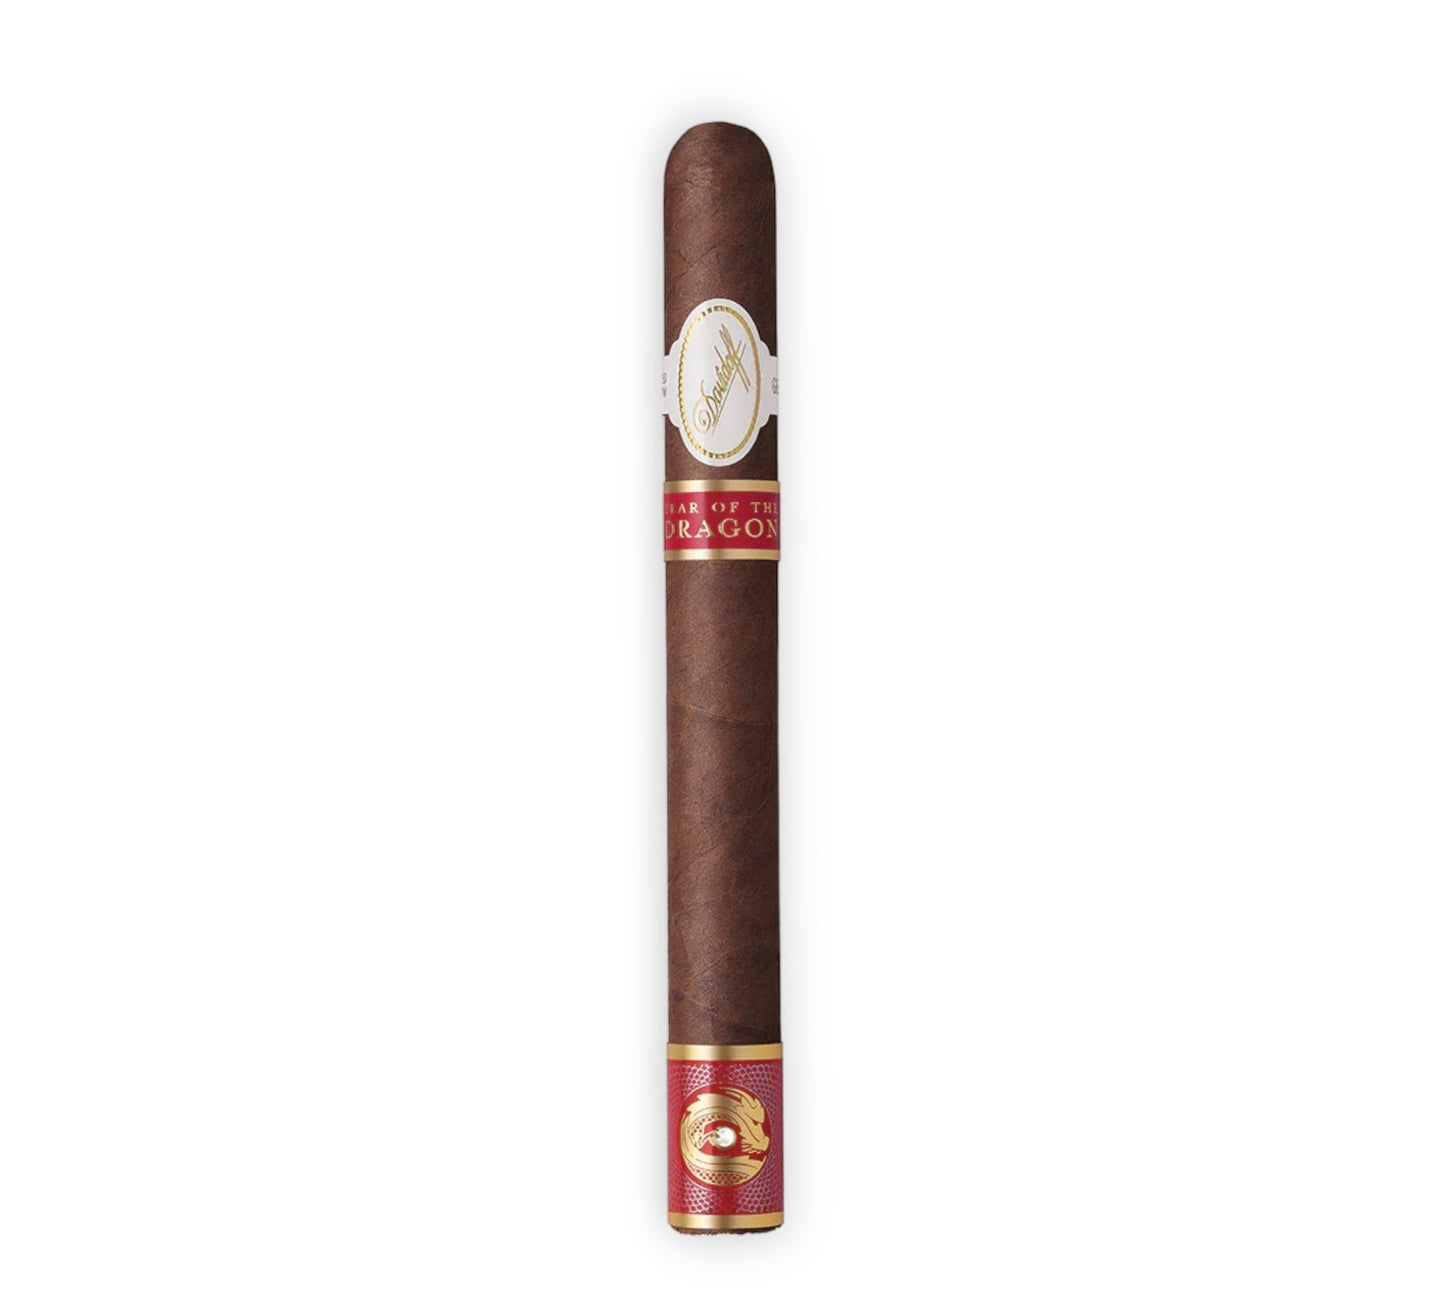 The Davidoff Year of the Dragon LE 2024